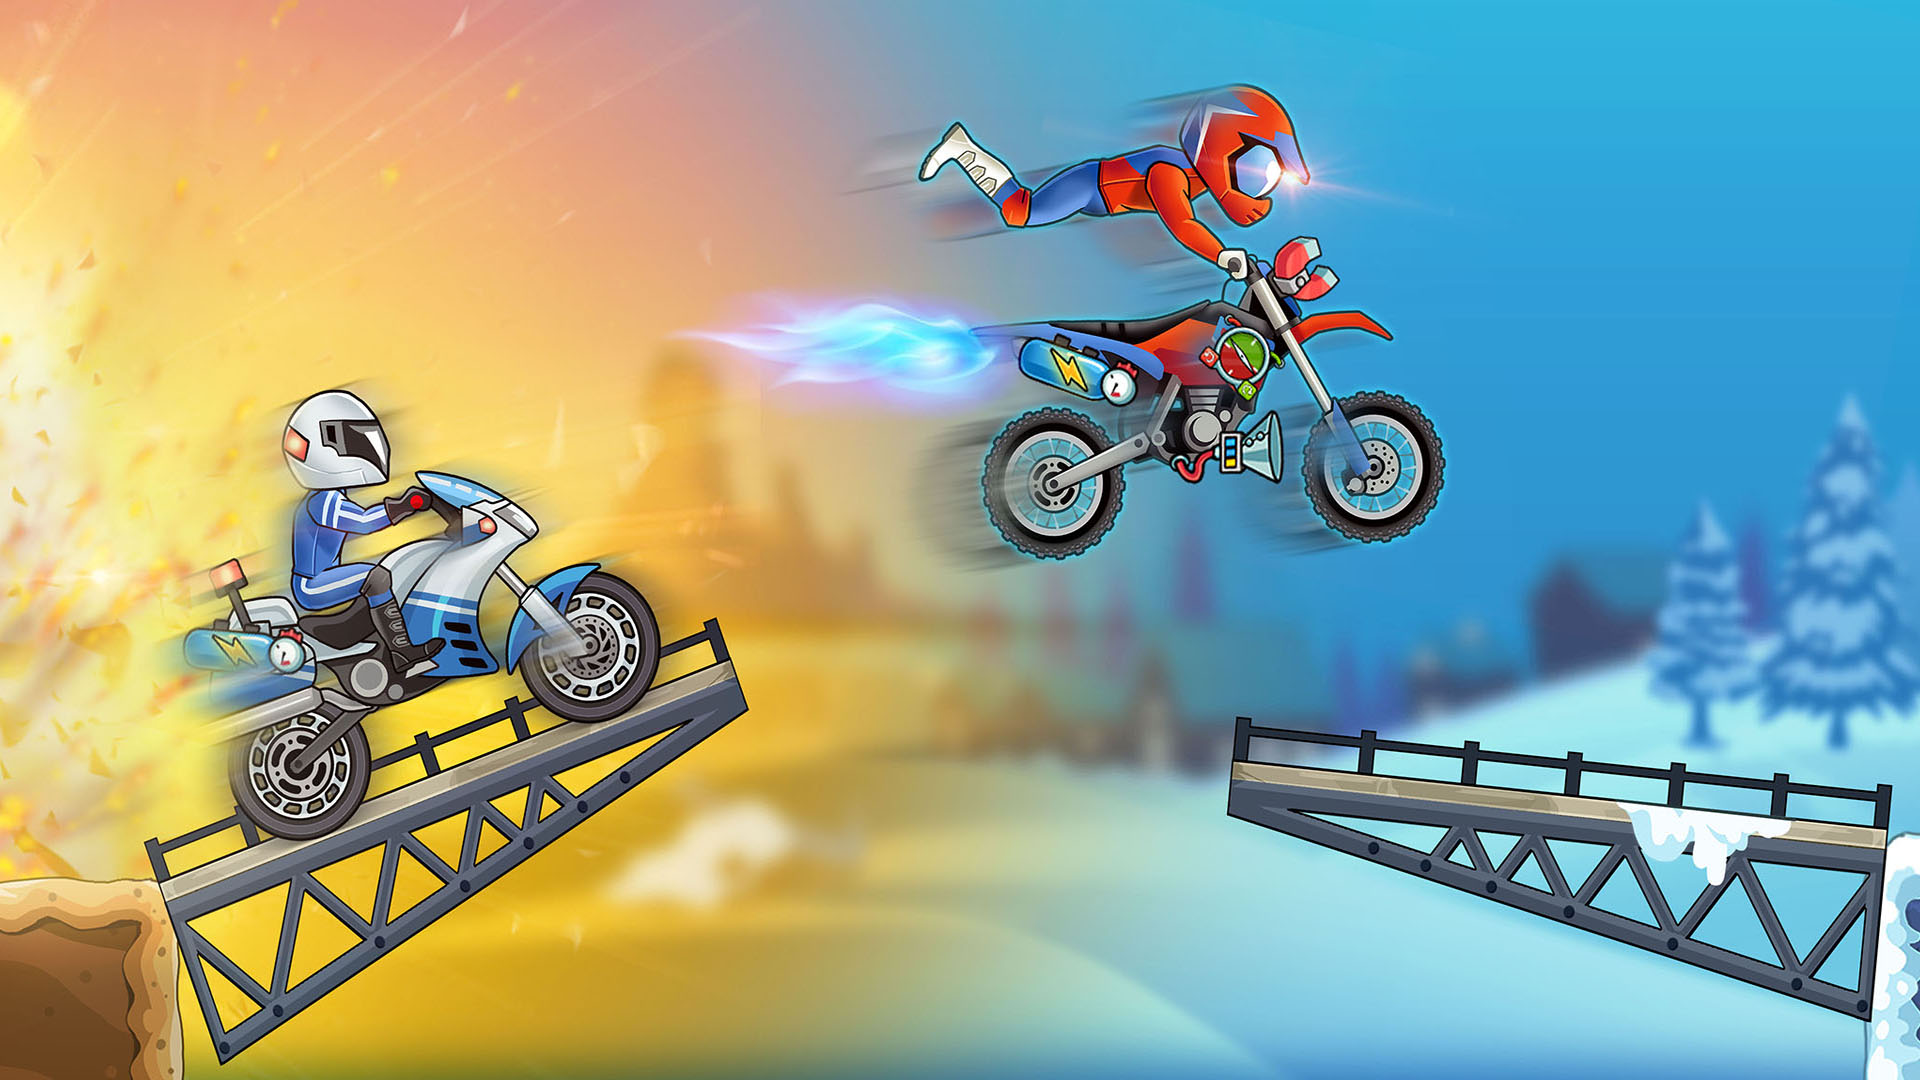 Scarica Turbo Bike: Extreme Racing gratis per Android.